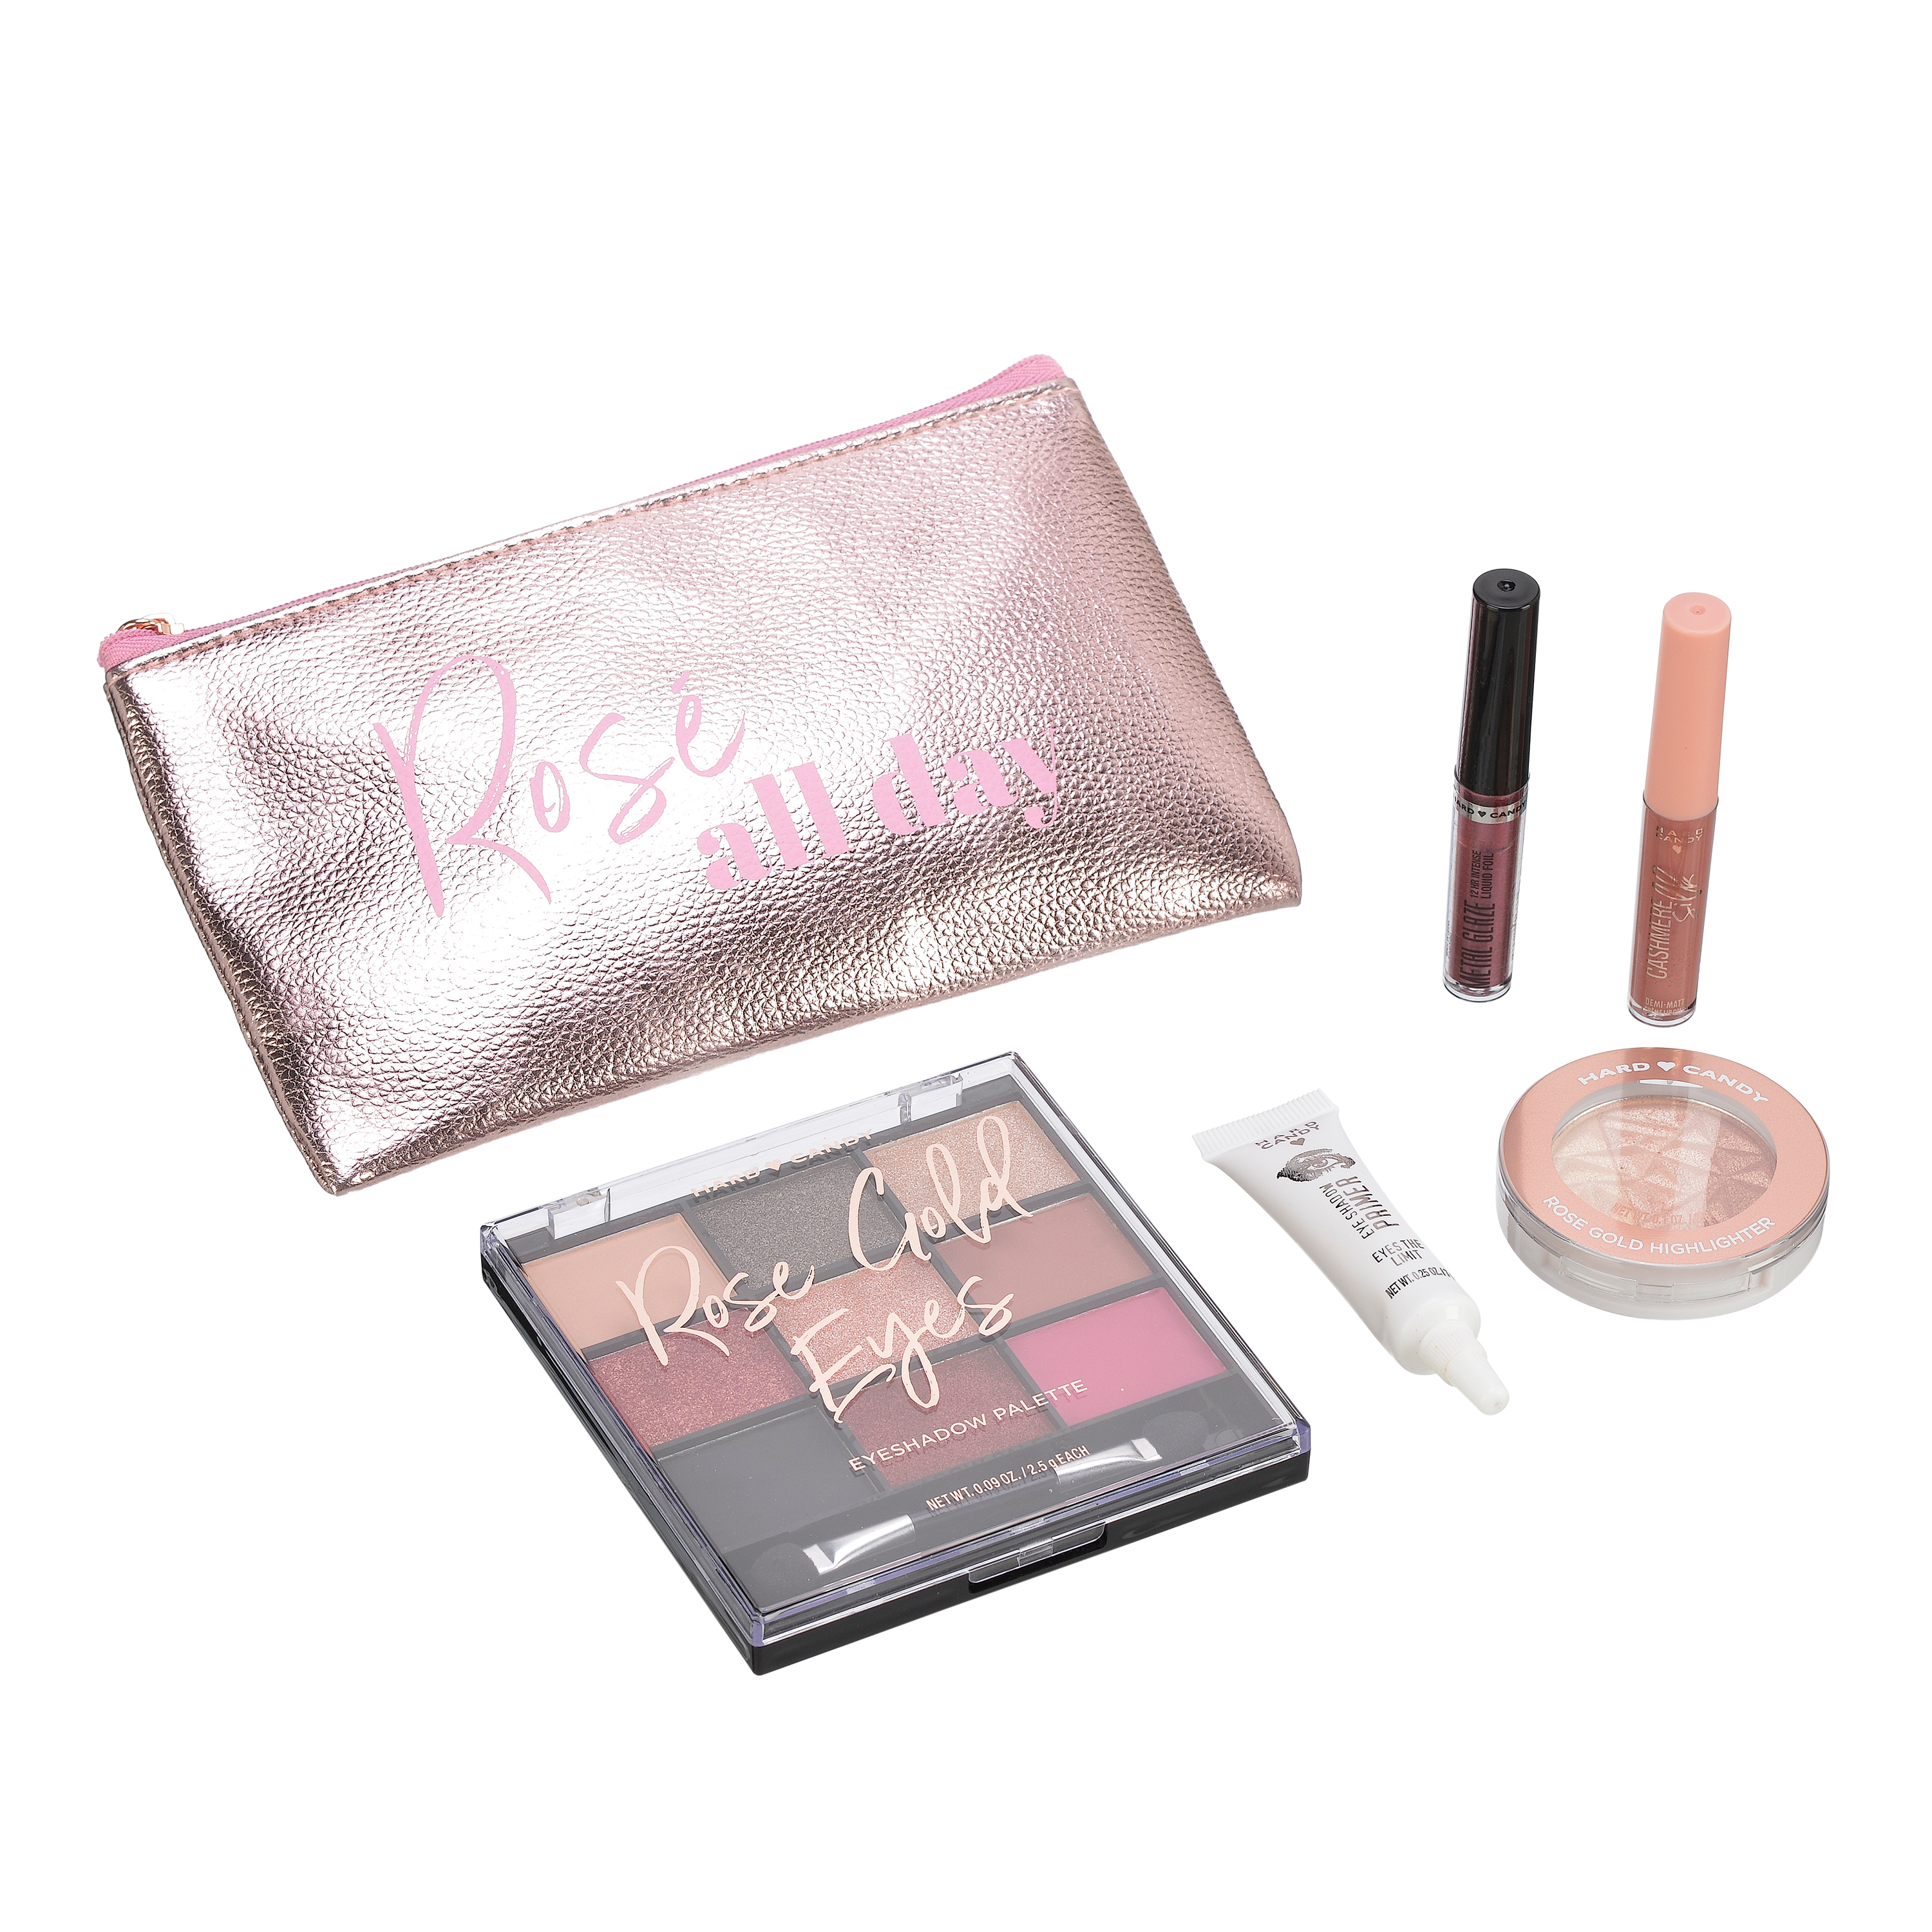 Hard Candy Holiday Makeup Gift Set, All That Rose Gold - image 3 of 3